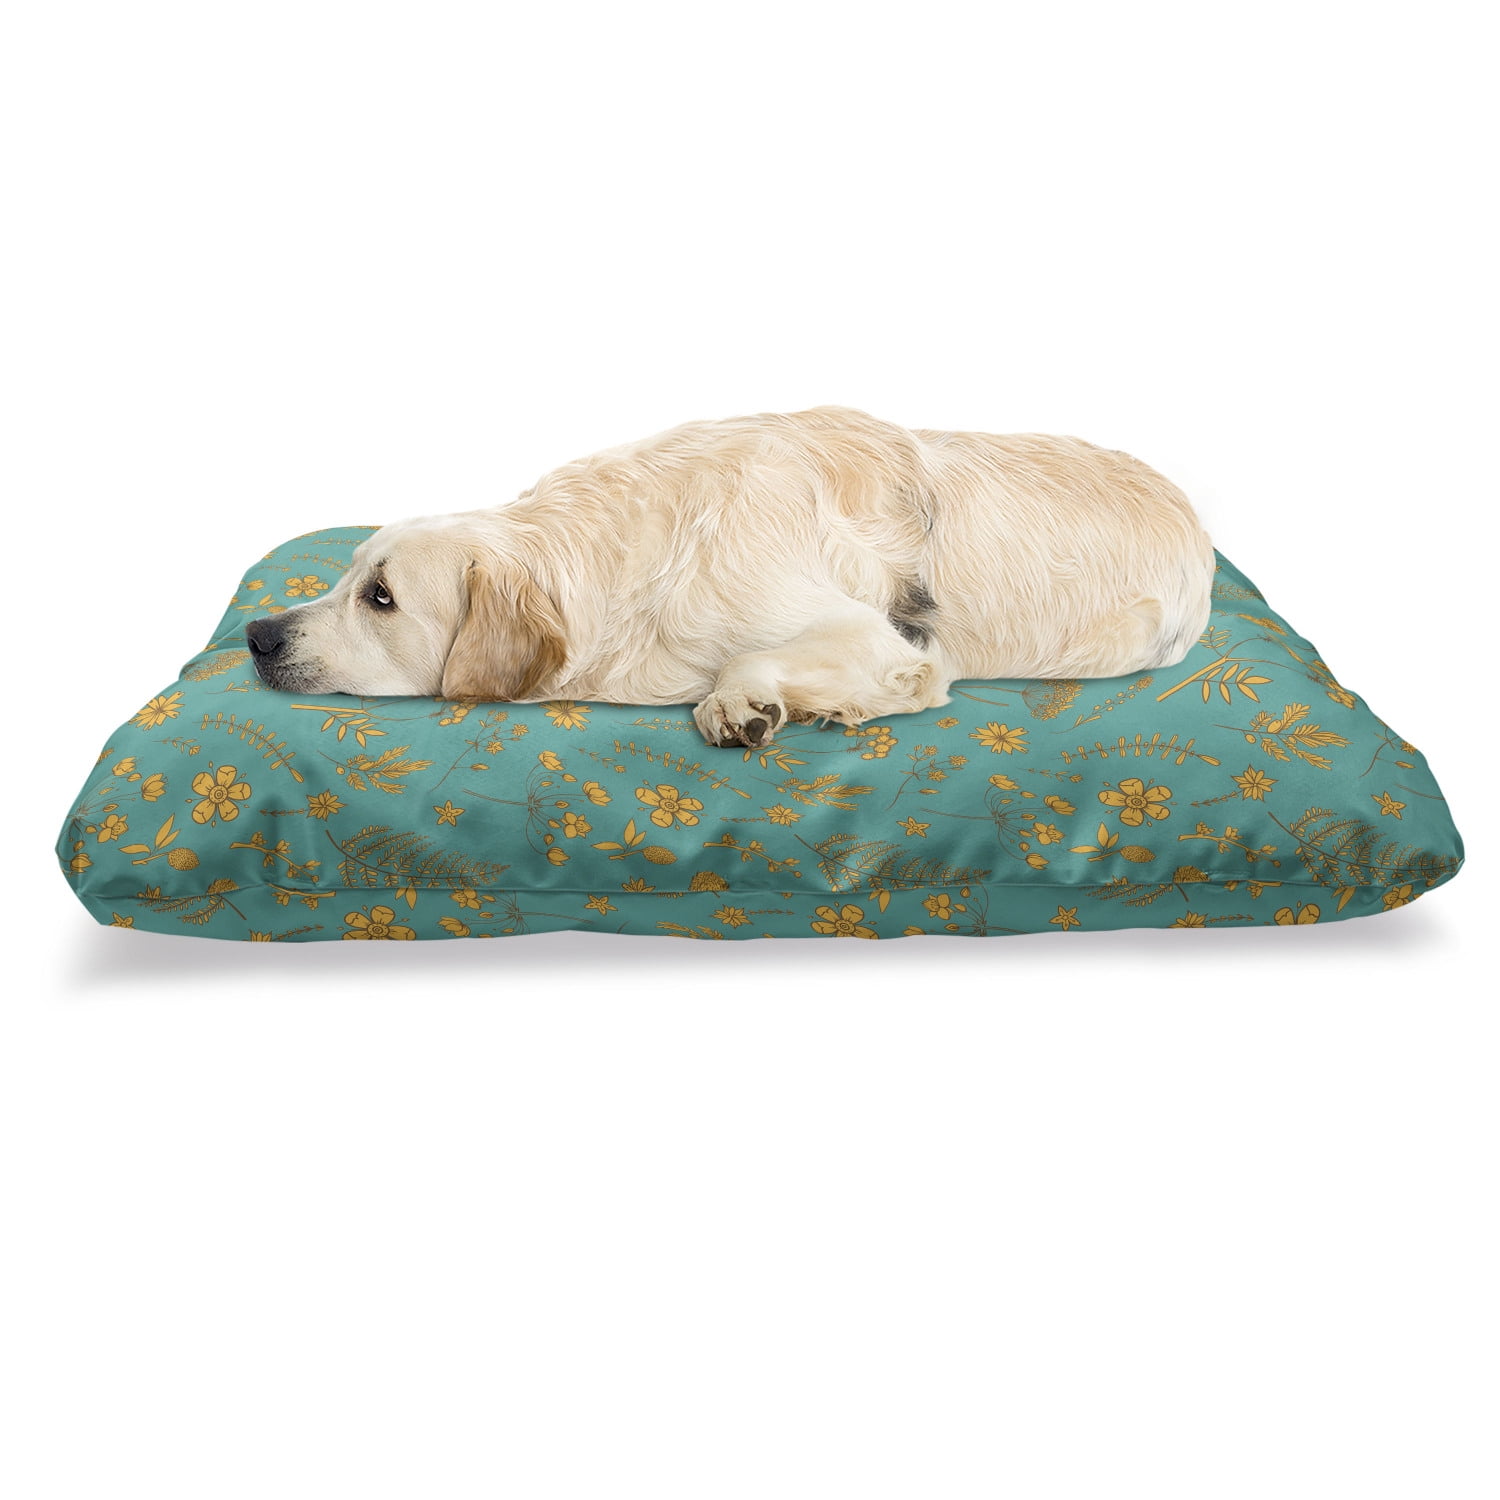 Herbarium pet bed in ivory and black cotton